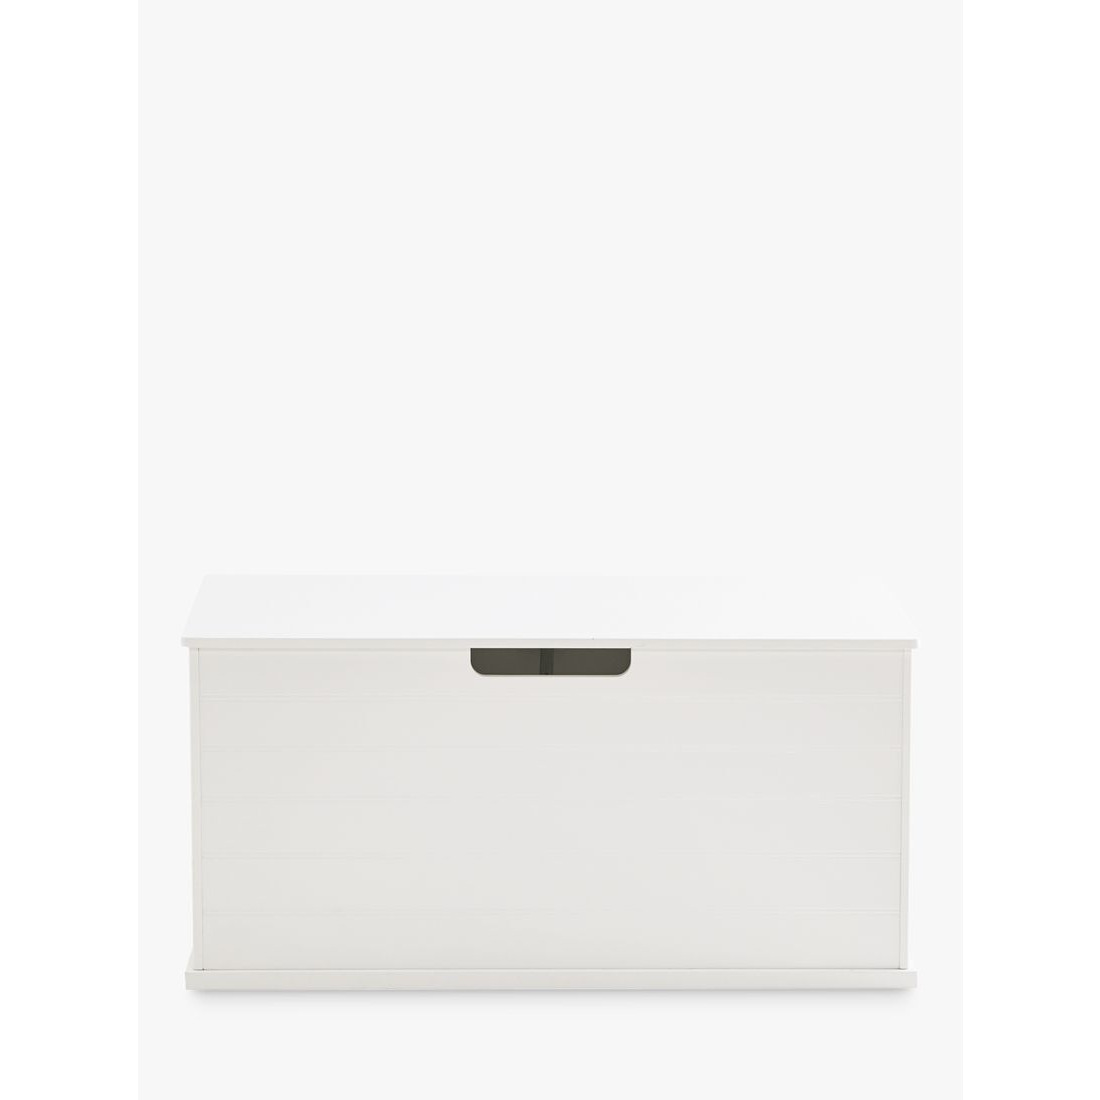 Great Little Trading Co Classic Toy Box with Cushion, White/Grey - image 1